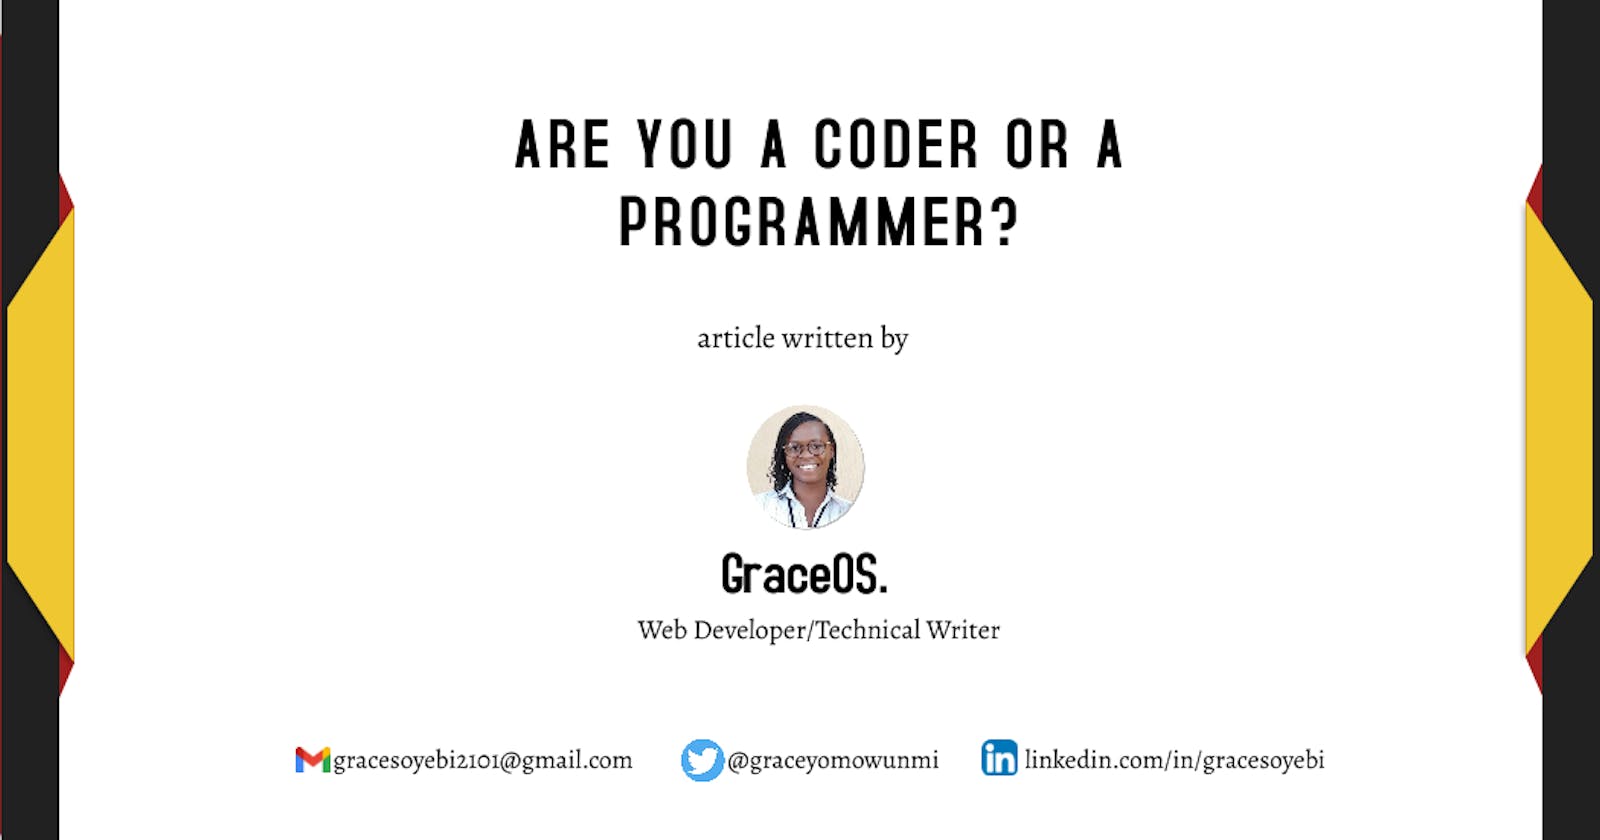 Are You a Coder or a Programmer?